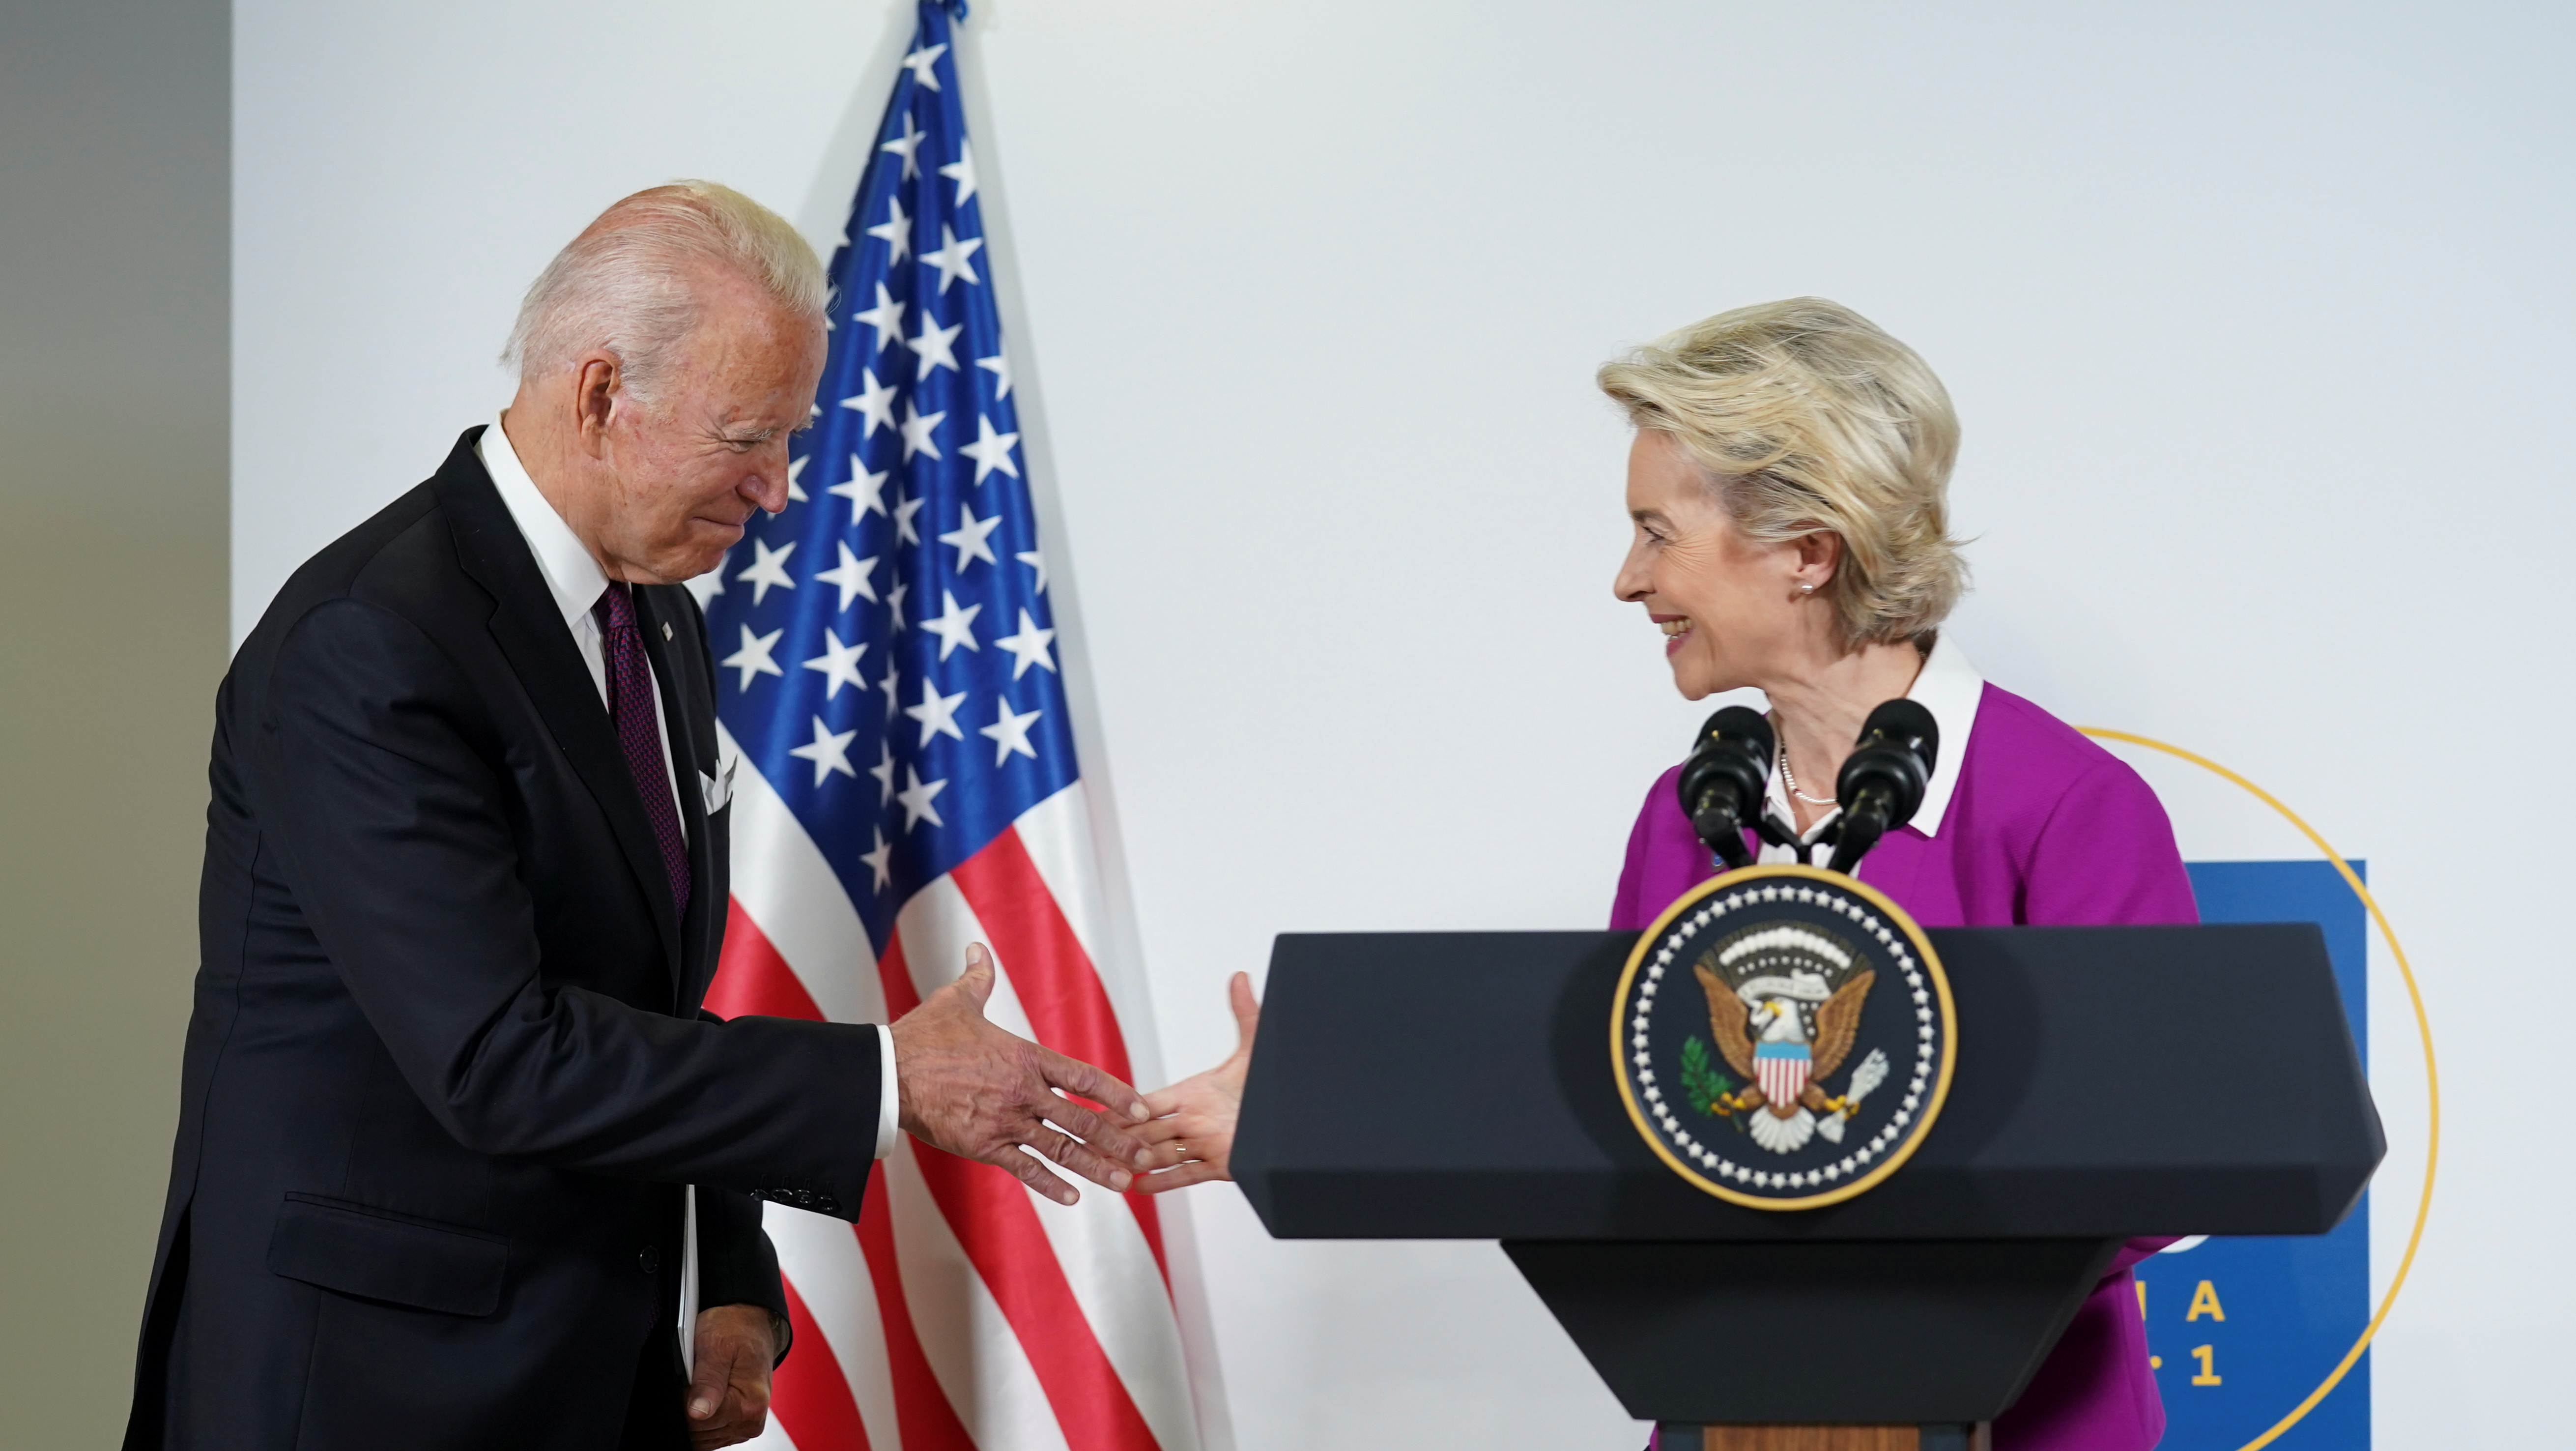 U.S. President Joe Biden and European Commission's President Ursula von der Leyen shake hands after speaking about steel and aluminium tariffs, on the sidelines of the G20 leaders' summit in Rome, Italy October 31, 2021. REUTERS/Kevin Lamarque